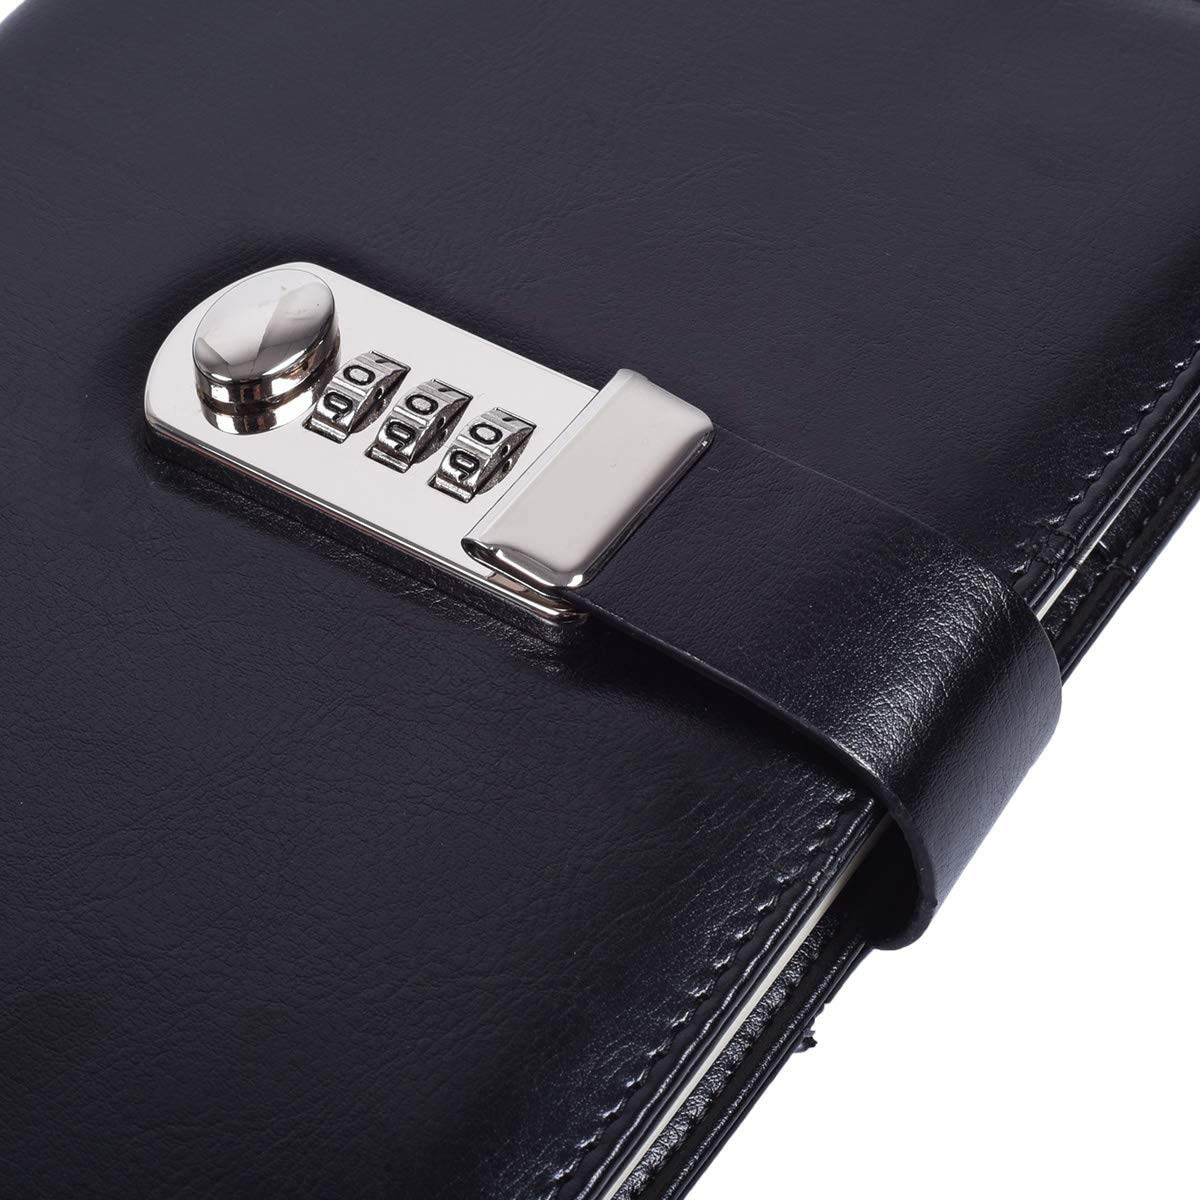 AccuPrints Black PU Leather Diary with Lock, Size 6 ny 8 inch